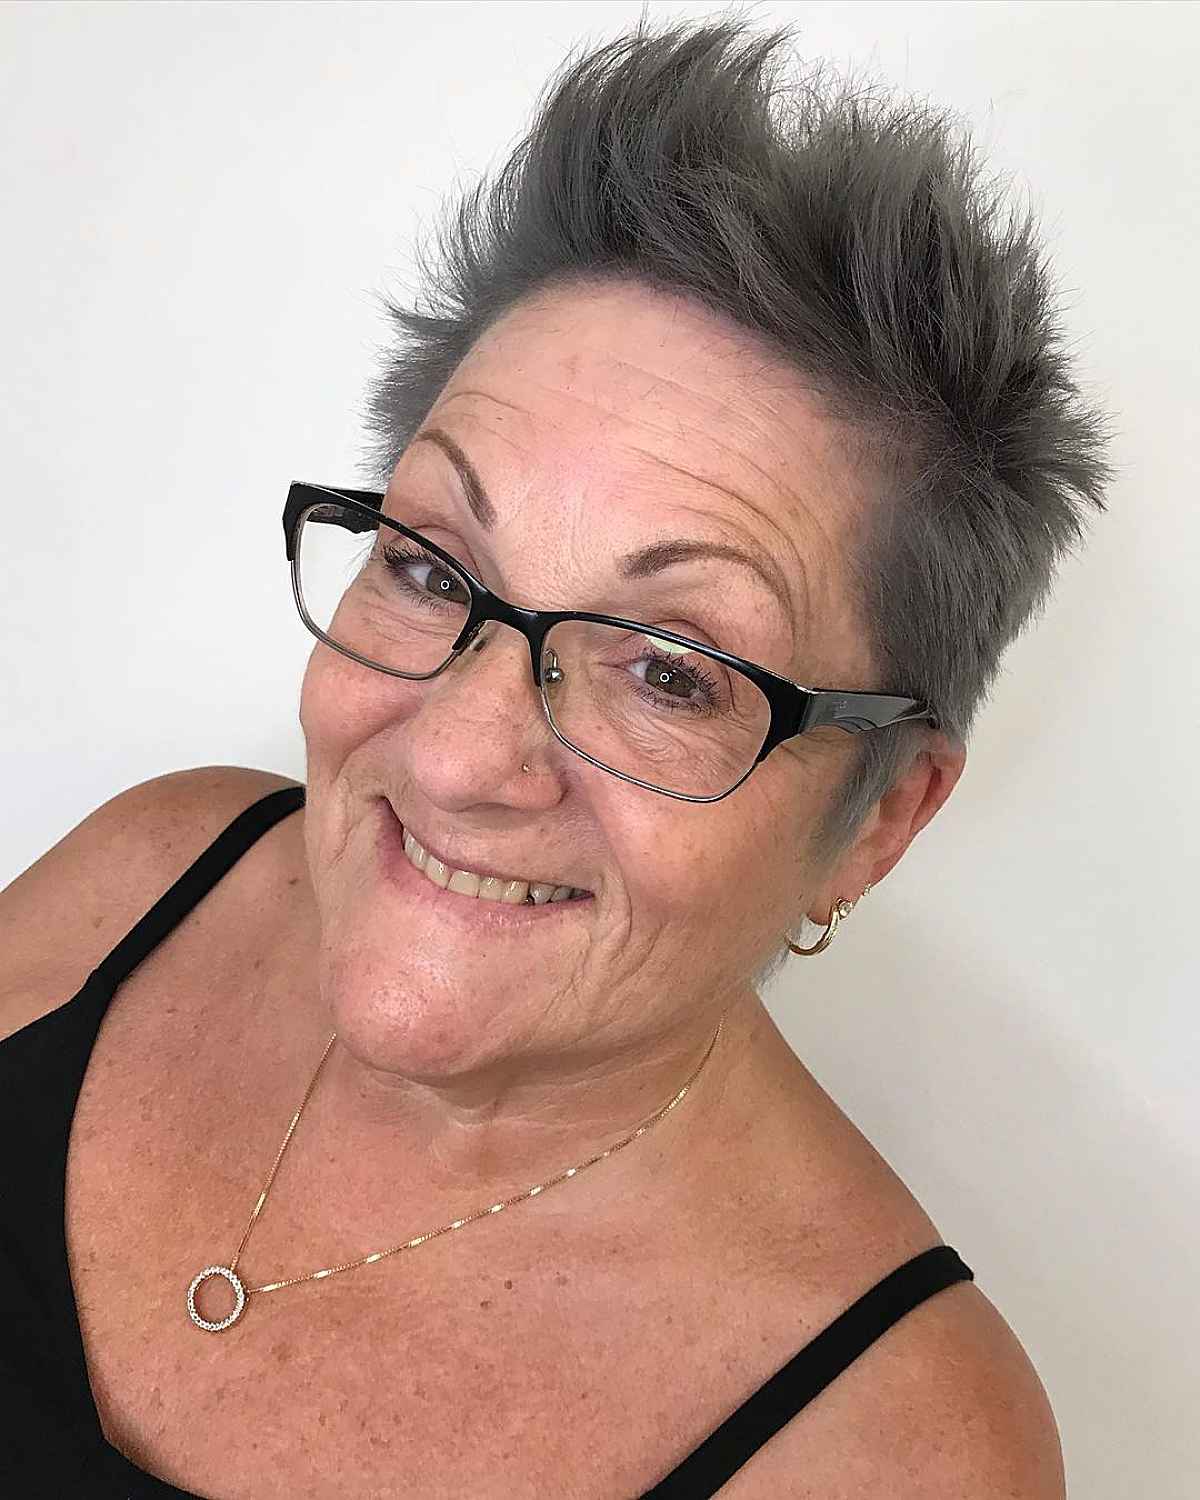 26 Stylish Wash-and-Wear Haircuts for Women Over 60 Short On Time